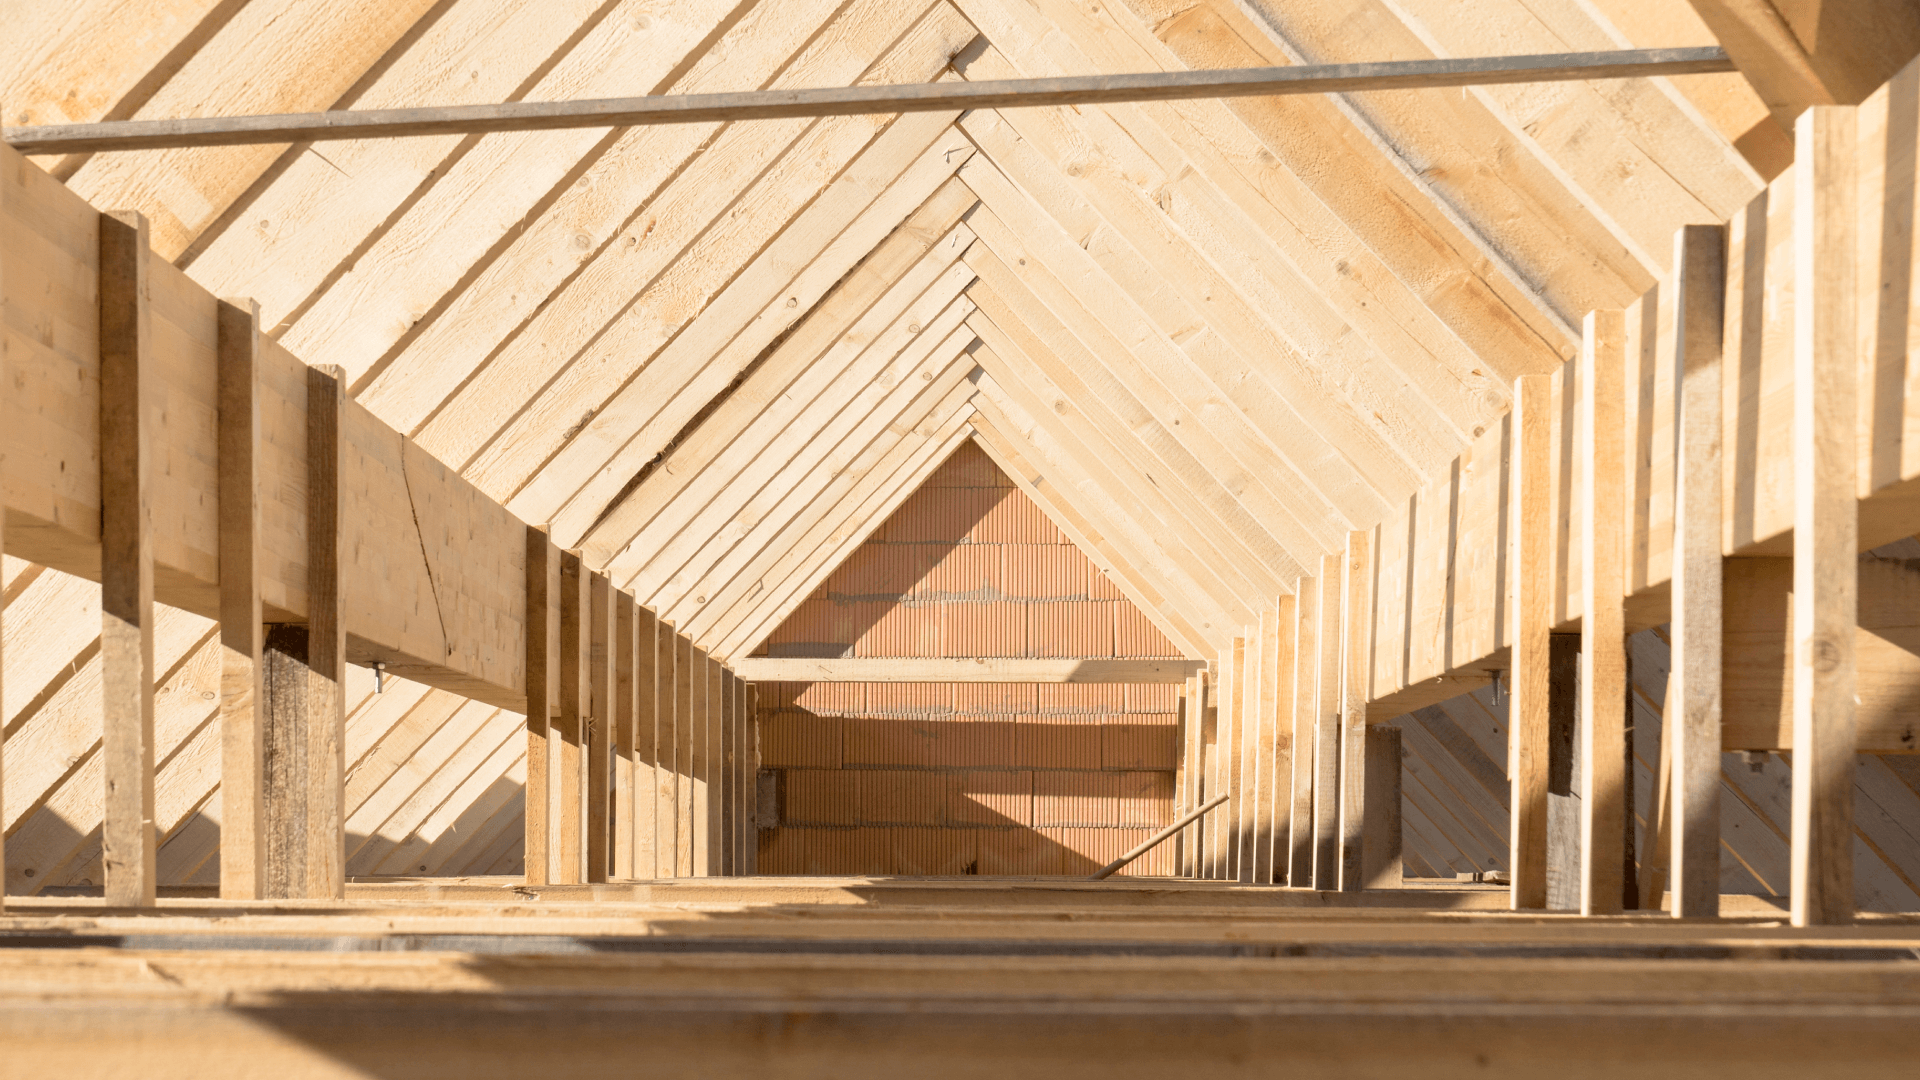 Surface Level Of Wooden Attic In Under Construction House